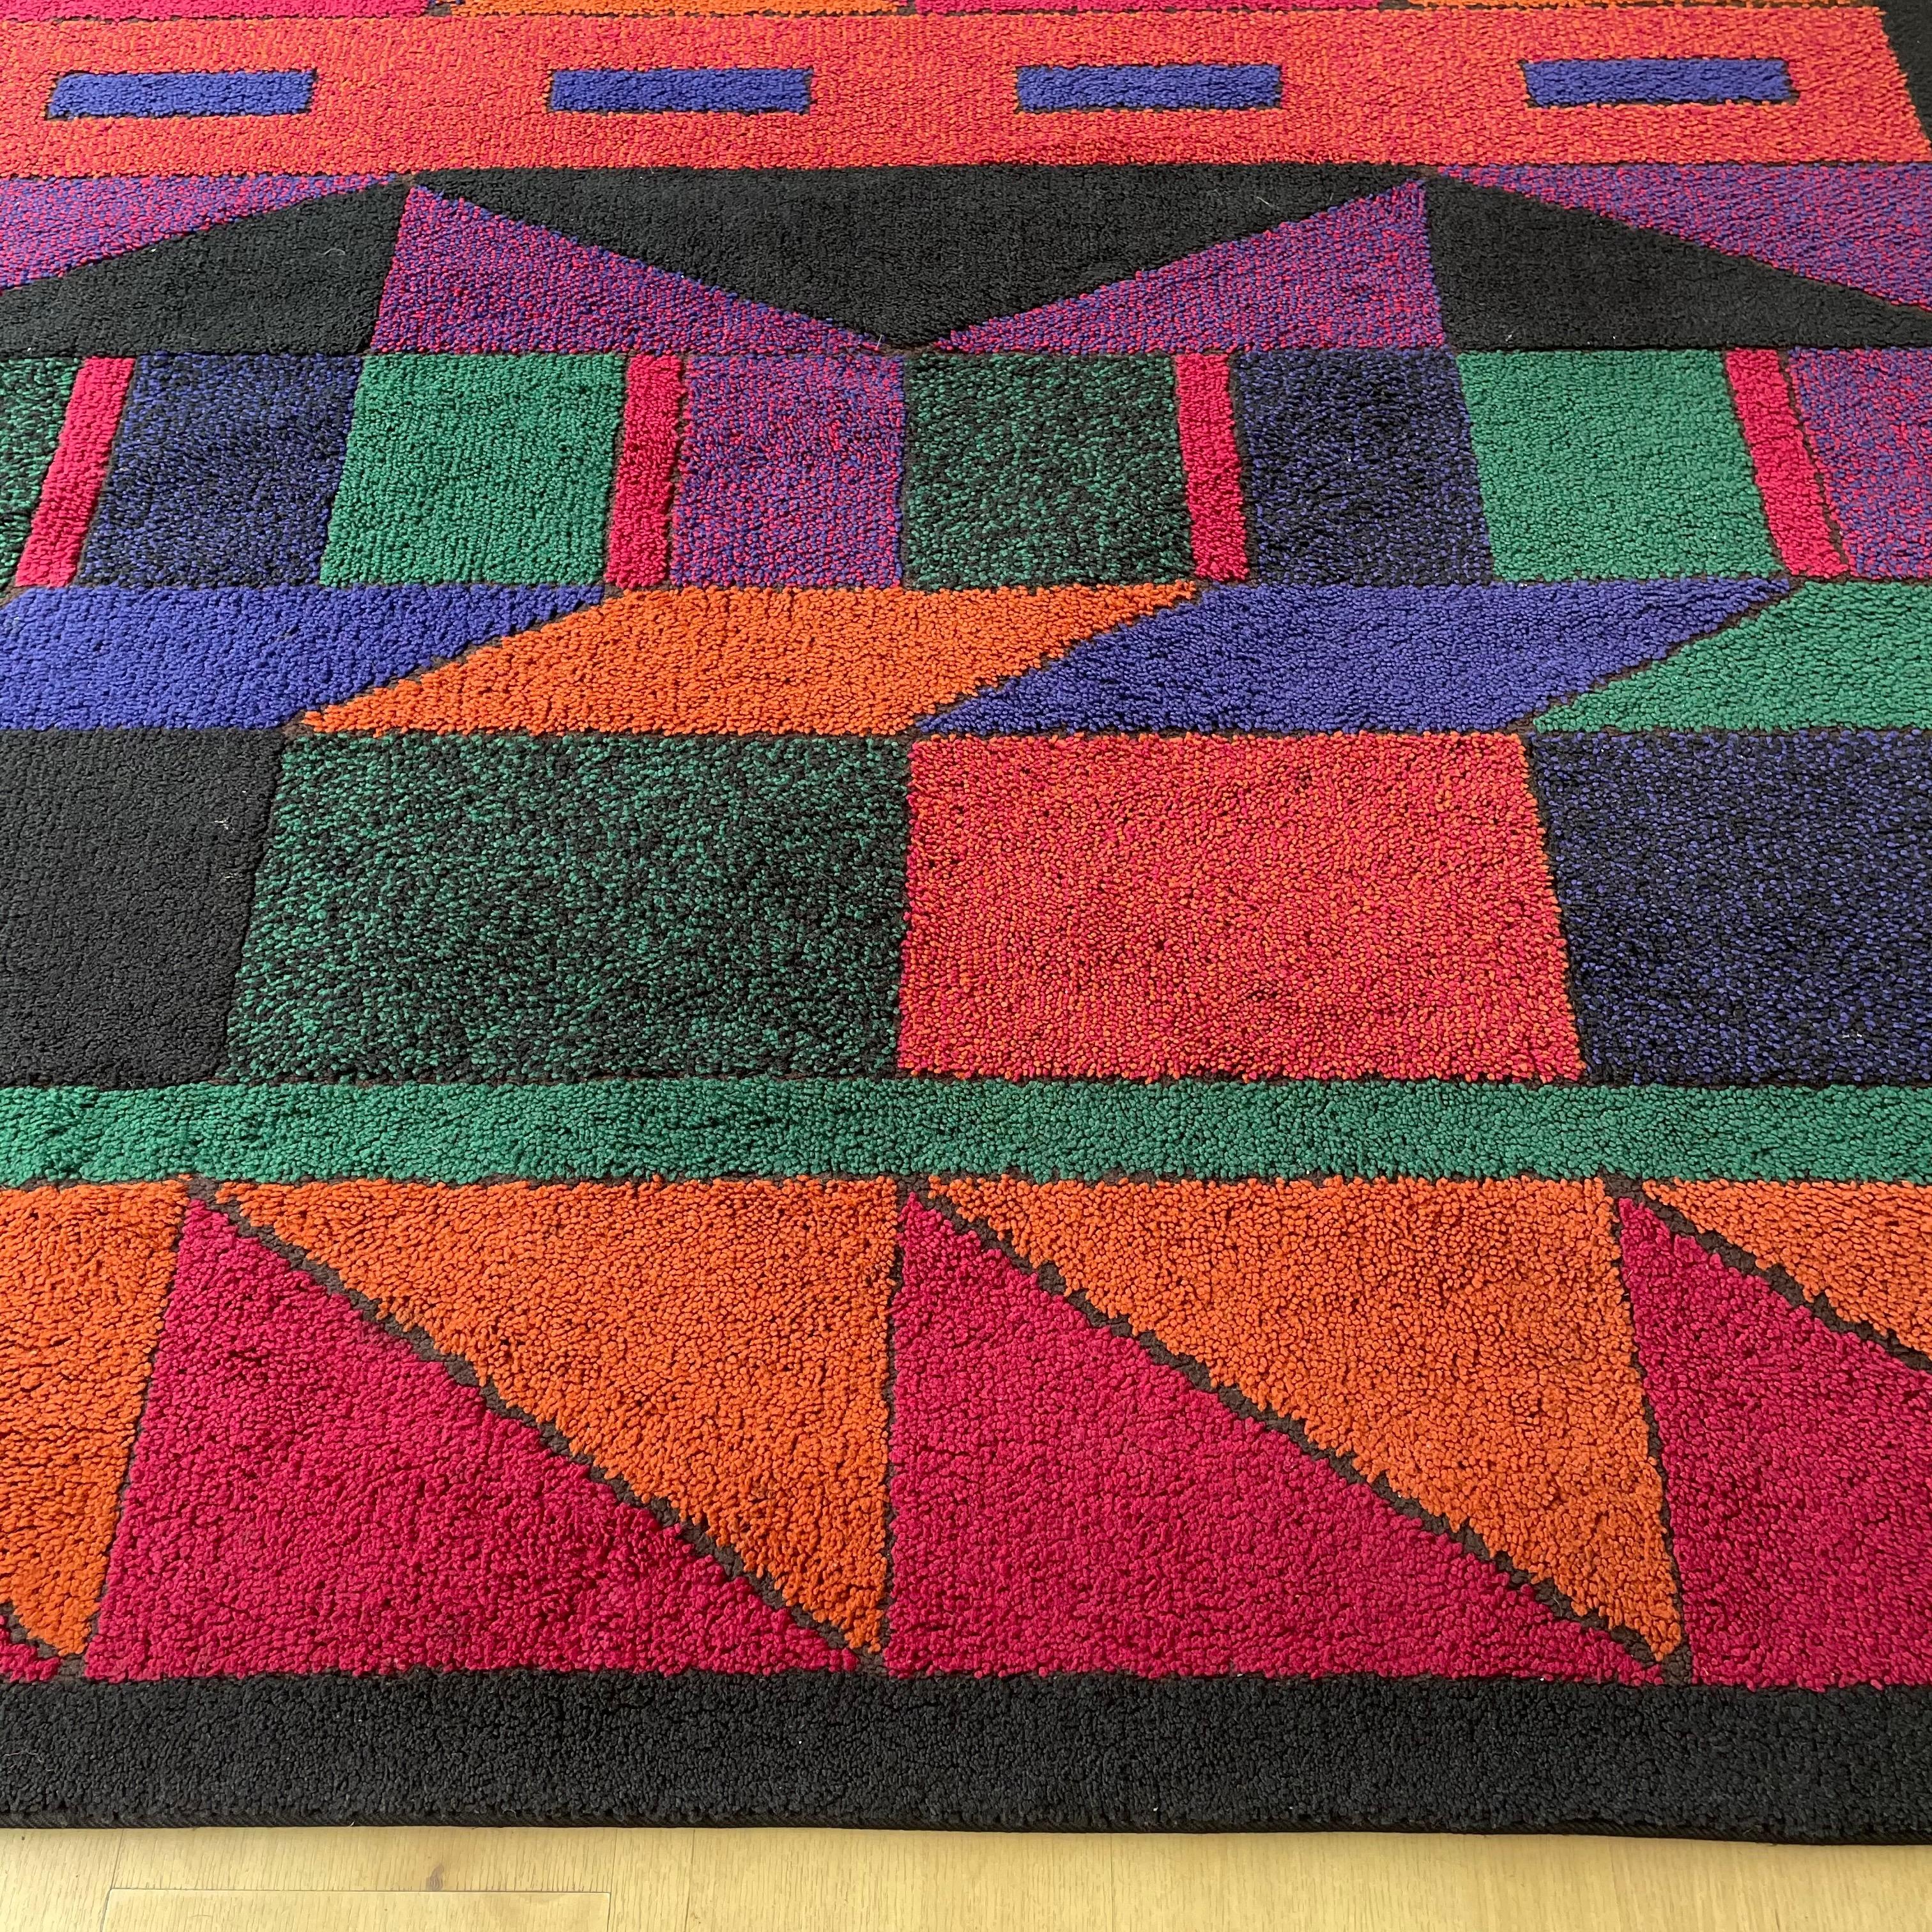 Psychedelic Memphis Style abstract Rug Carpet by Atrium Tefzet, Germany 1980s For Sale 1